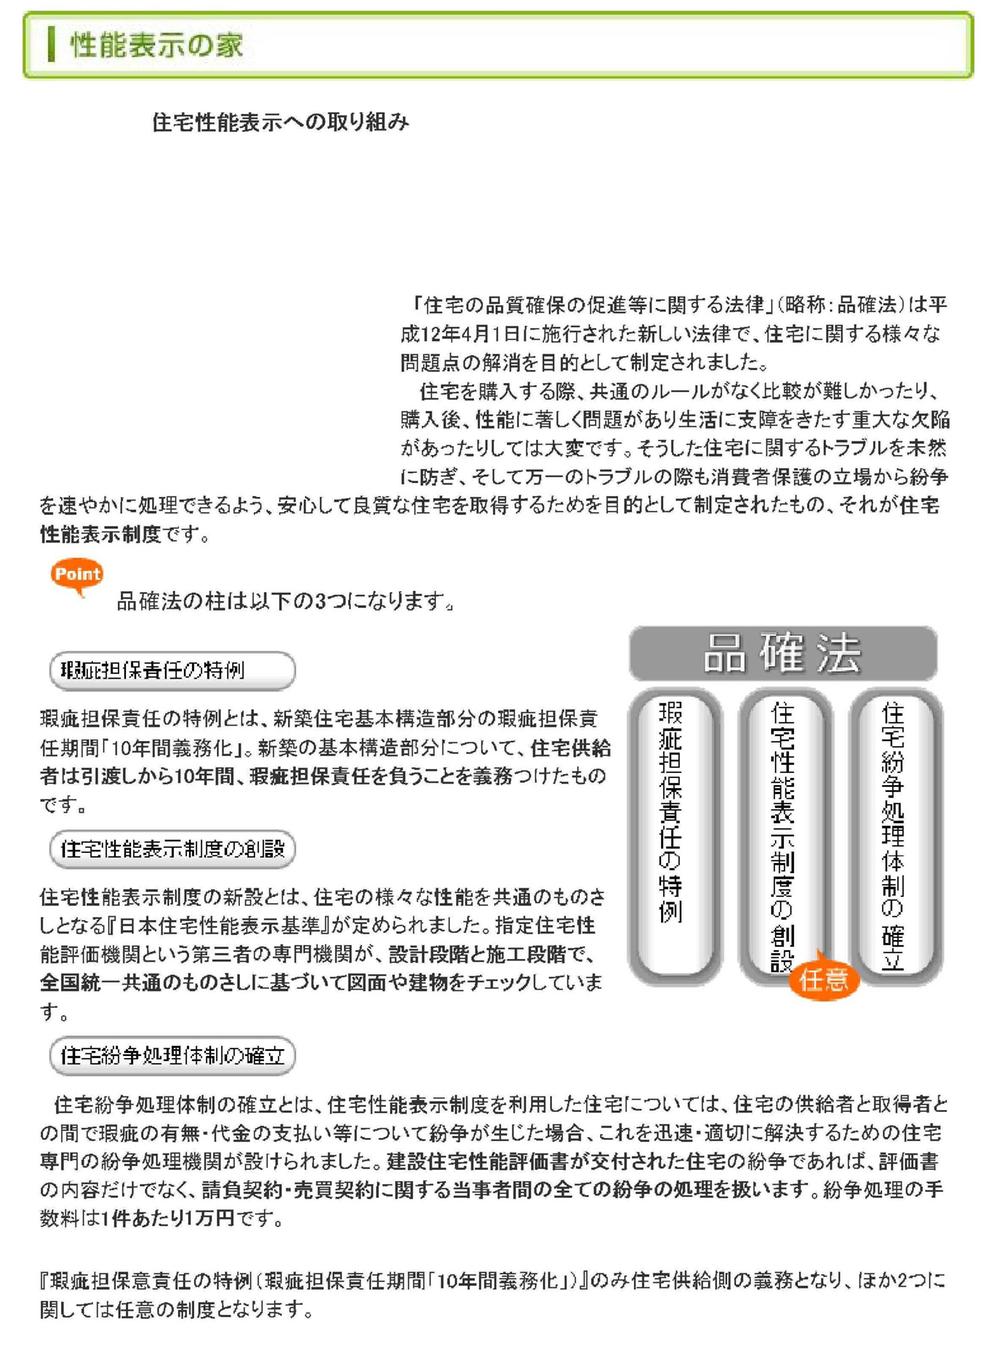 Construction ・ Construction method ・ specification. Housing Performance Evaluation